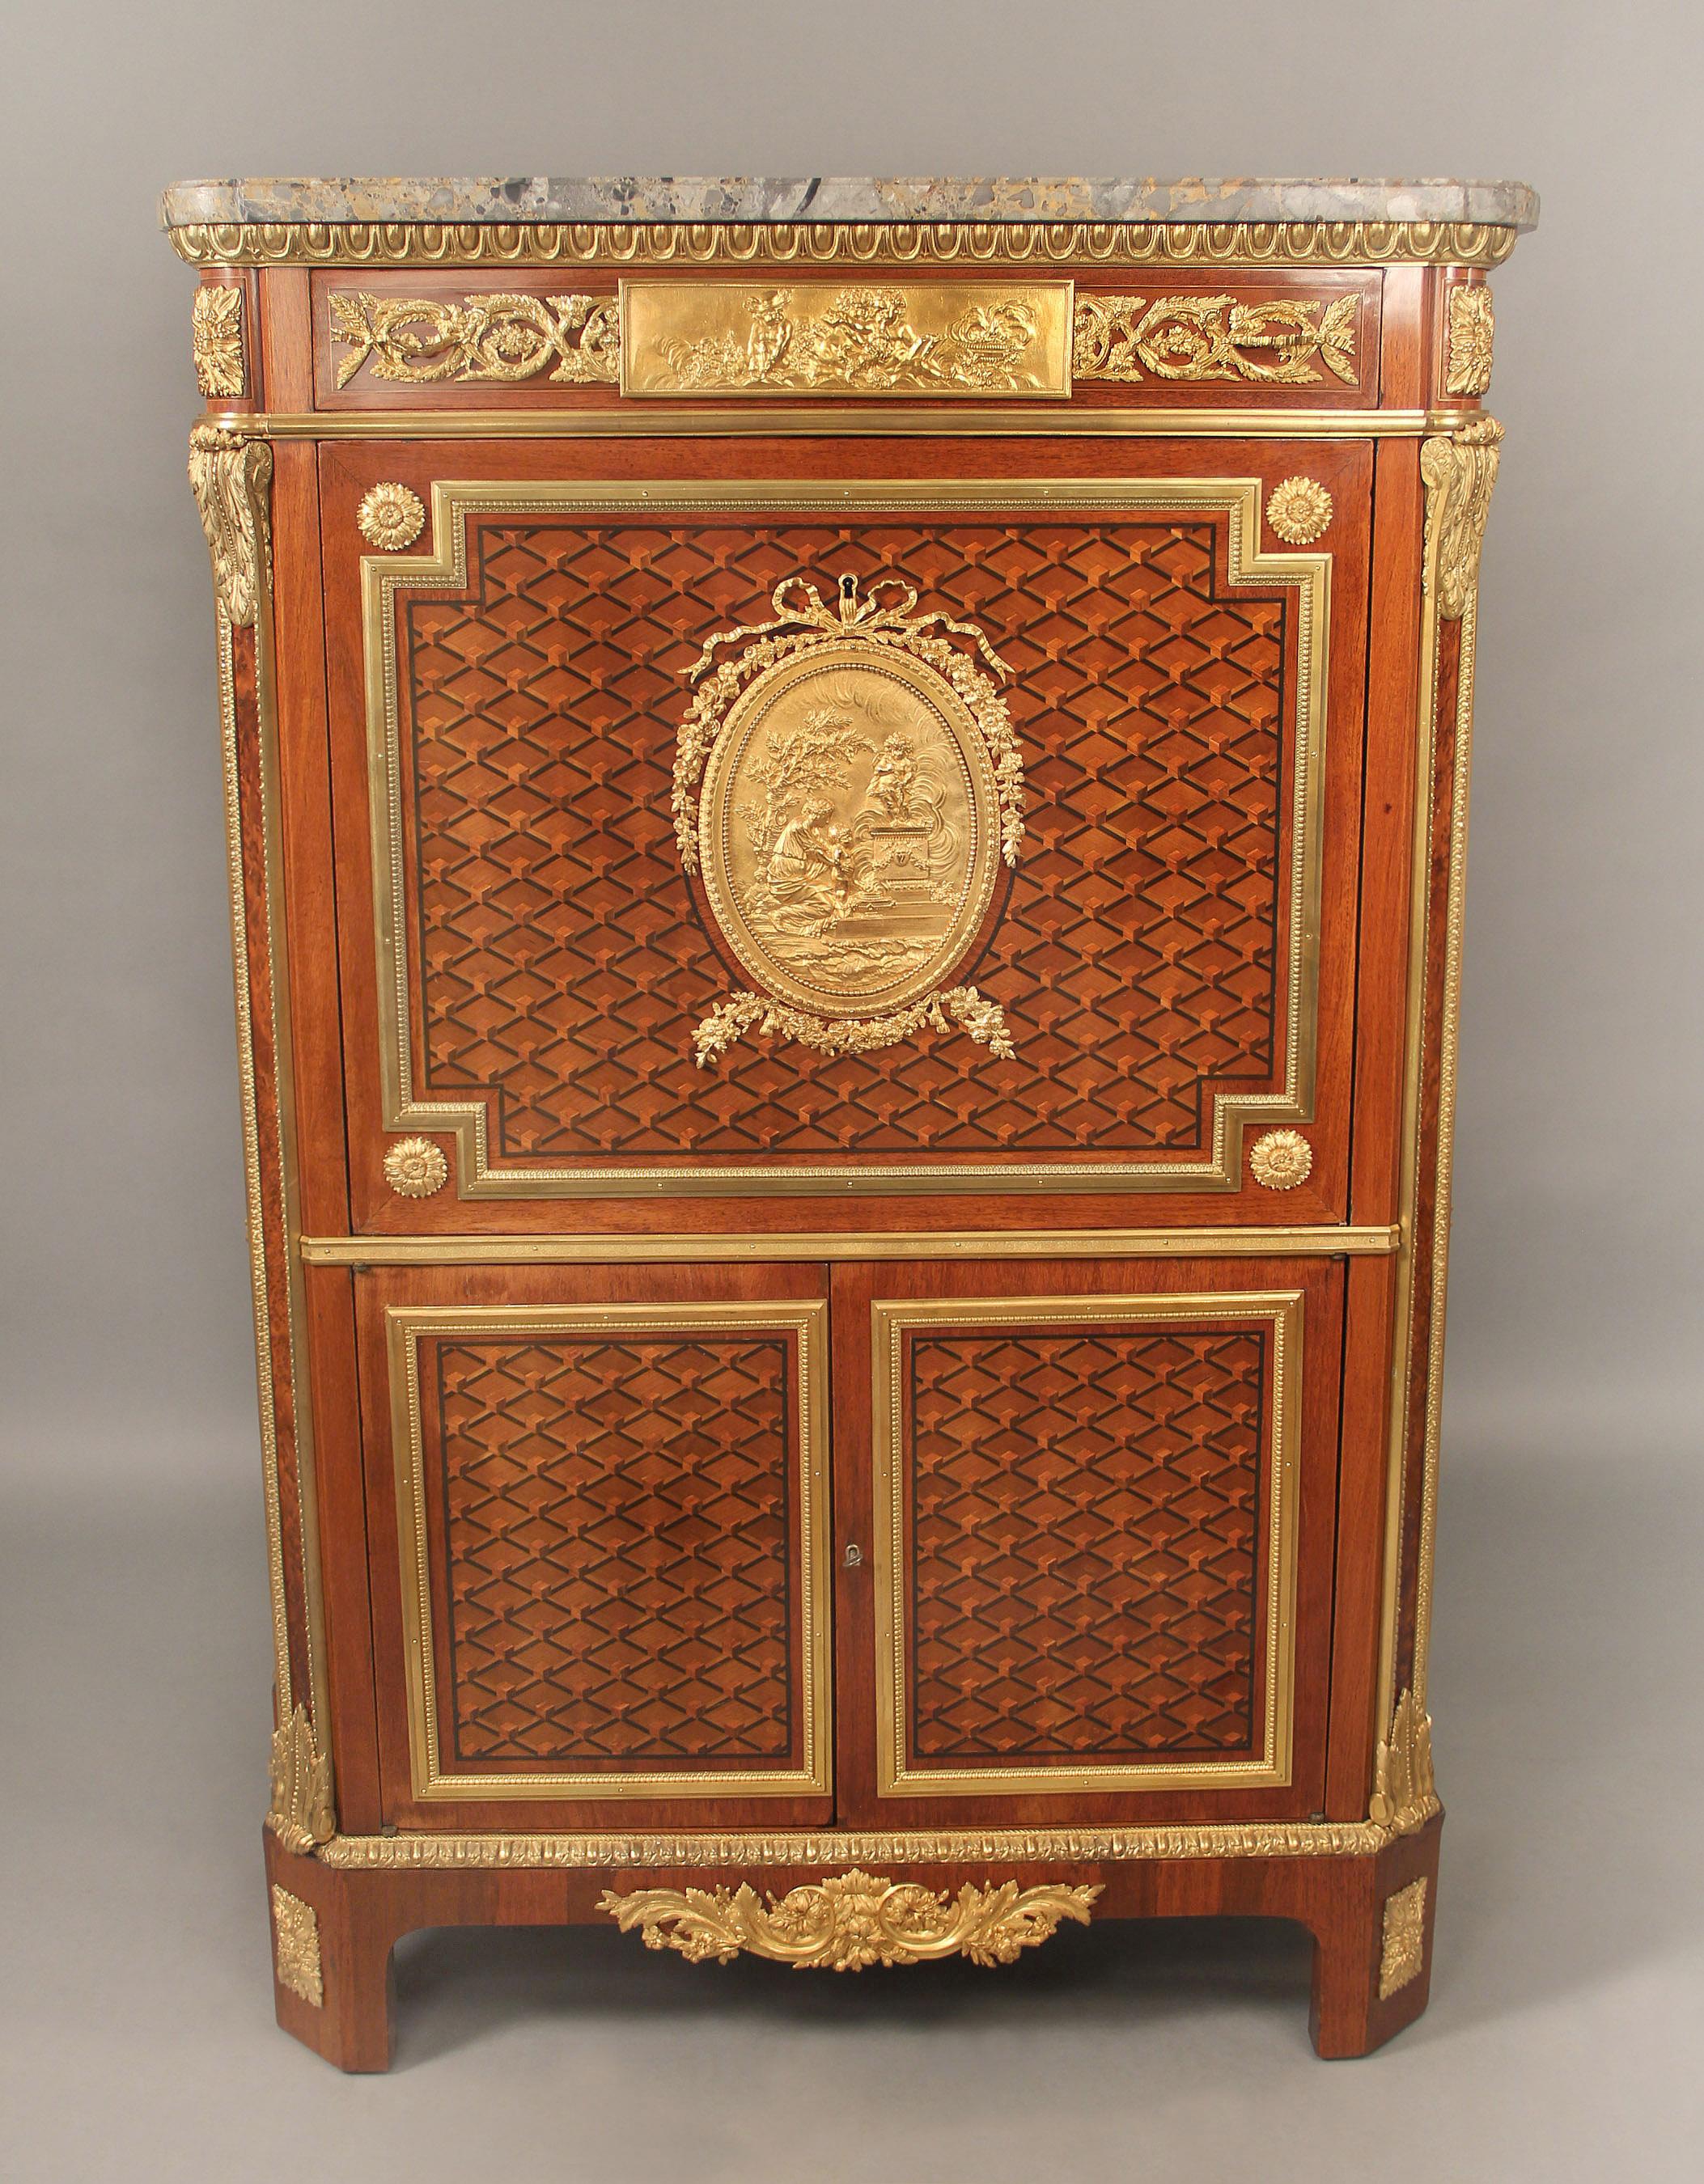 A Special Late 19th Century Gilt Bronze Mounted Inlaid Parquetry Secretaire a Abattant

The shaped marble top above a long center frieze drawer with a large central bronze plaque of putti at play, the beautiful parquetry drop-down door centered with